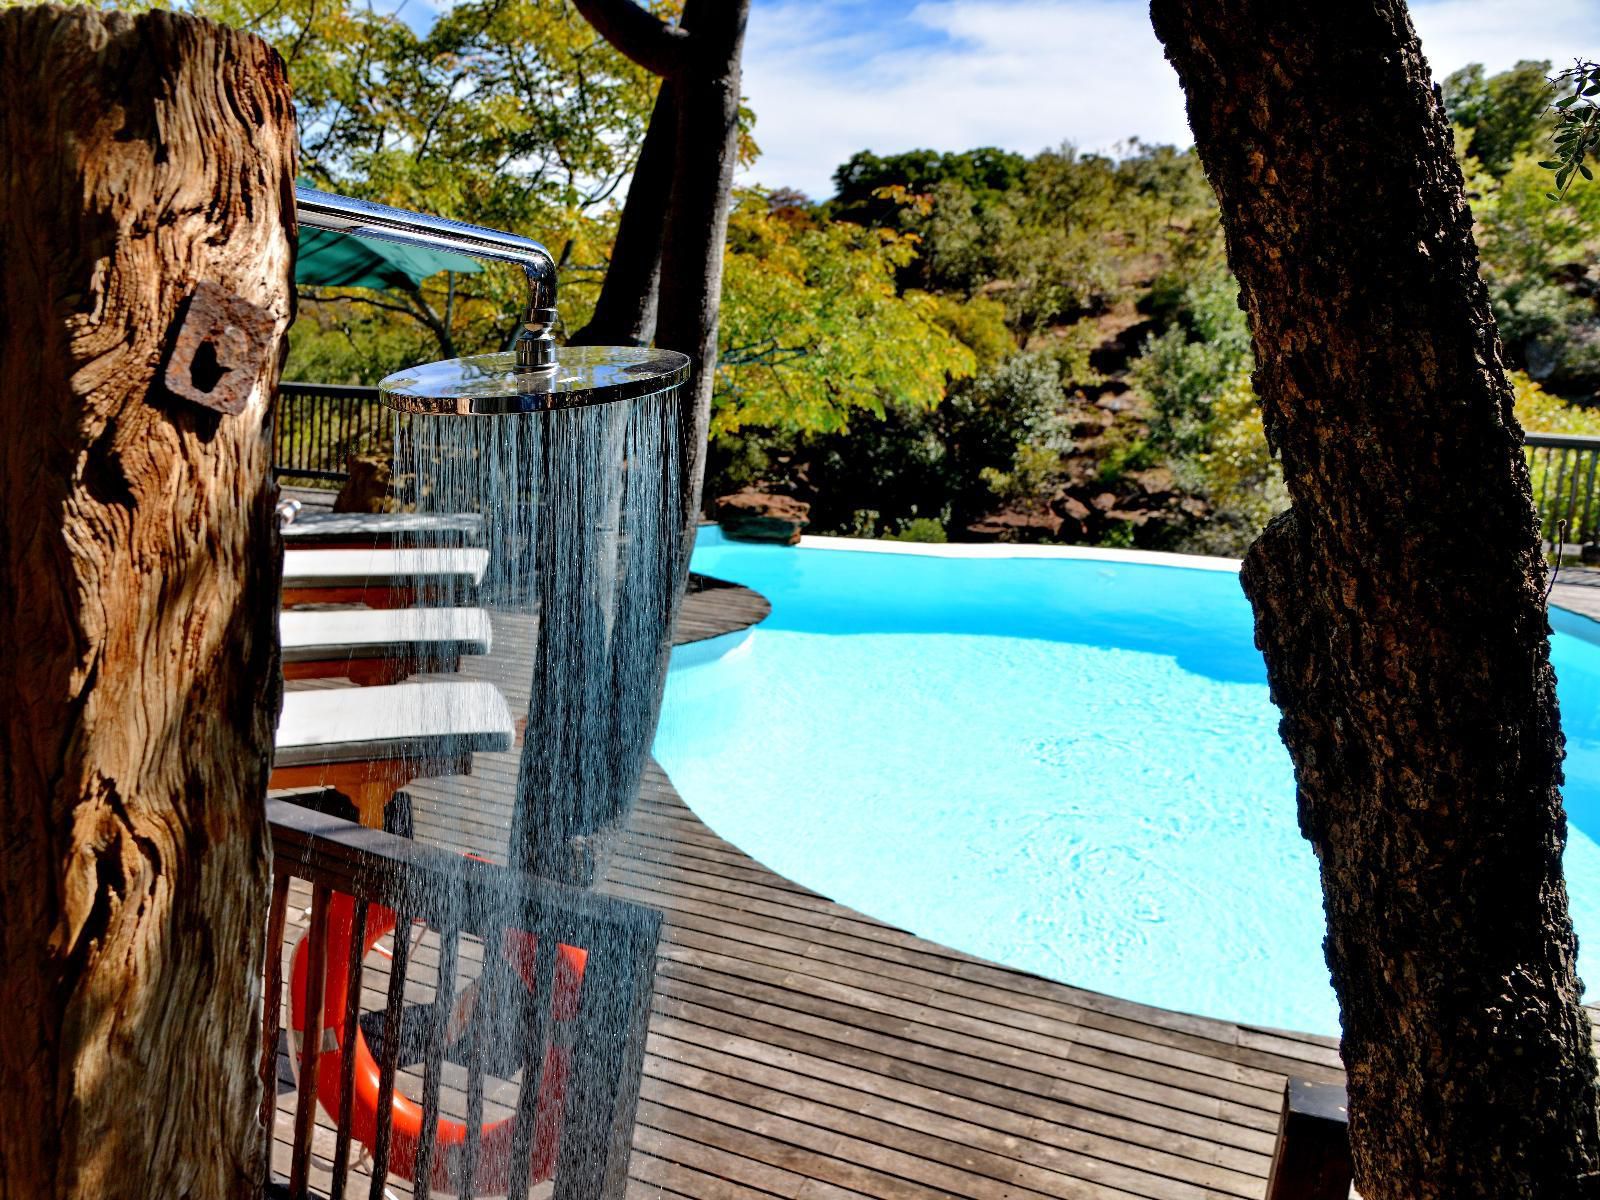 Laluka Safari Lodge Welgevonden Game Reserve Limpopo Province South Africa Complementary Colors, Swimming Pool